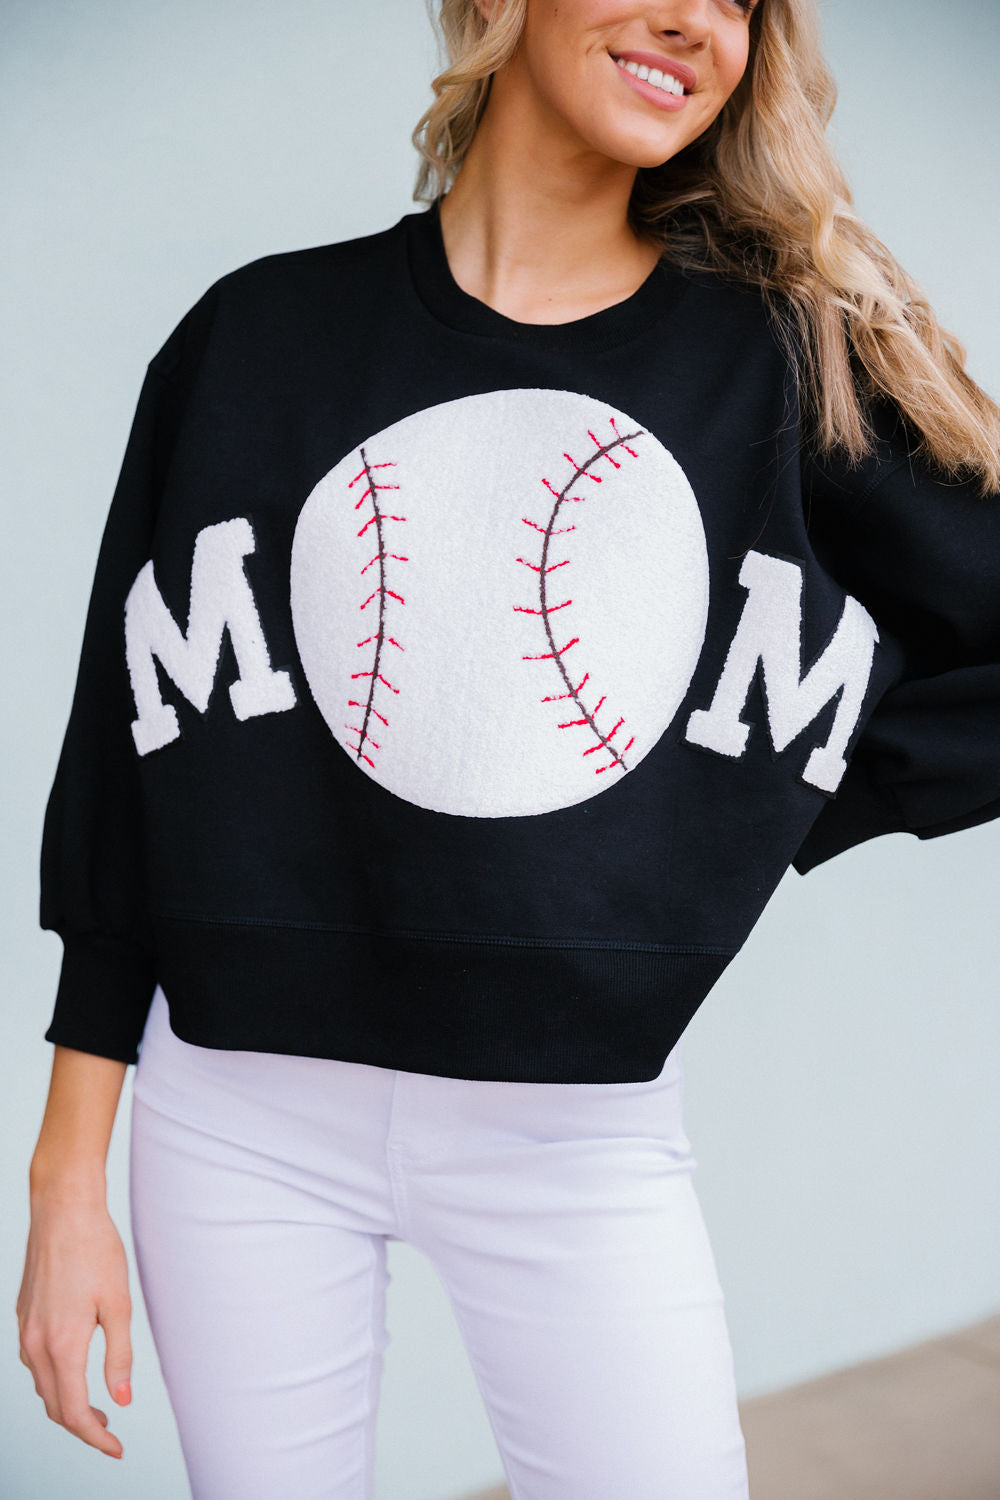 Mothers day baseball mom commercial｜TikTok Search